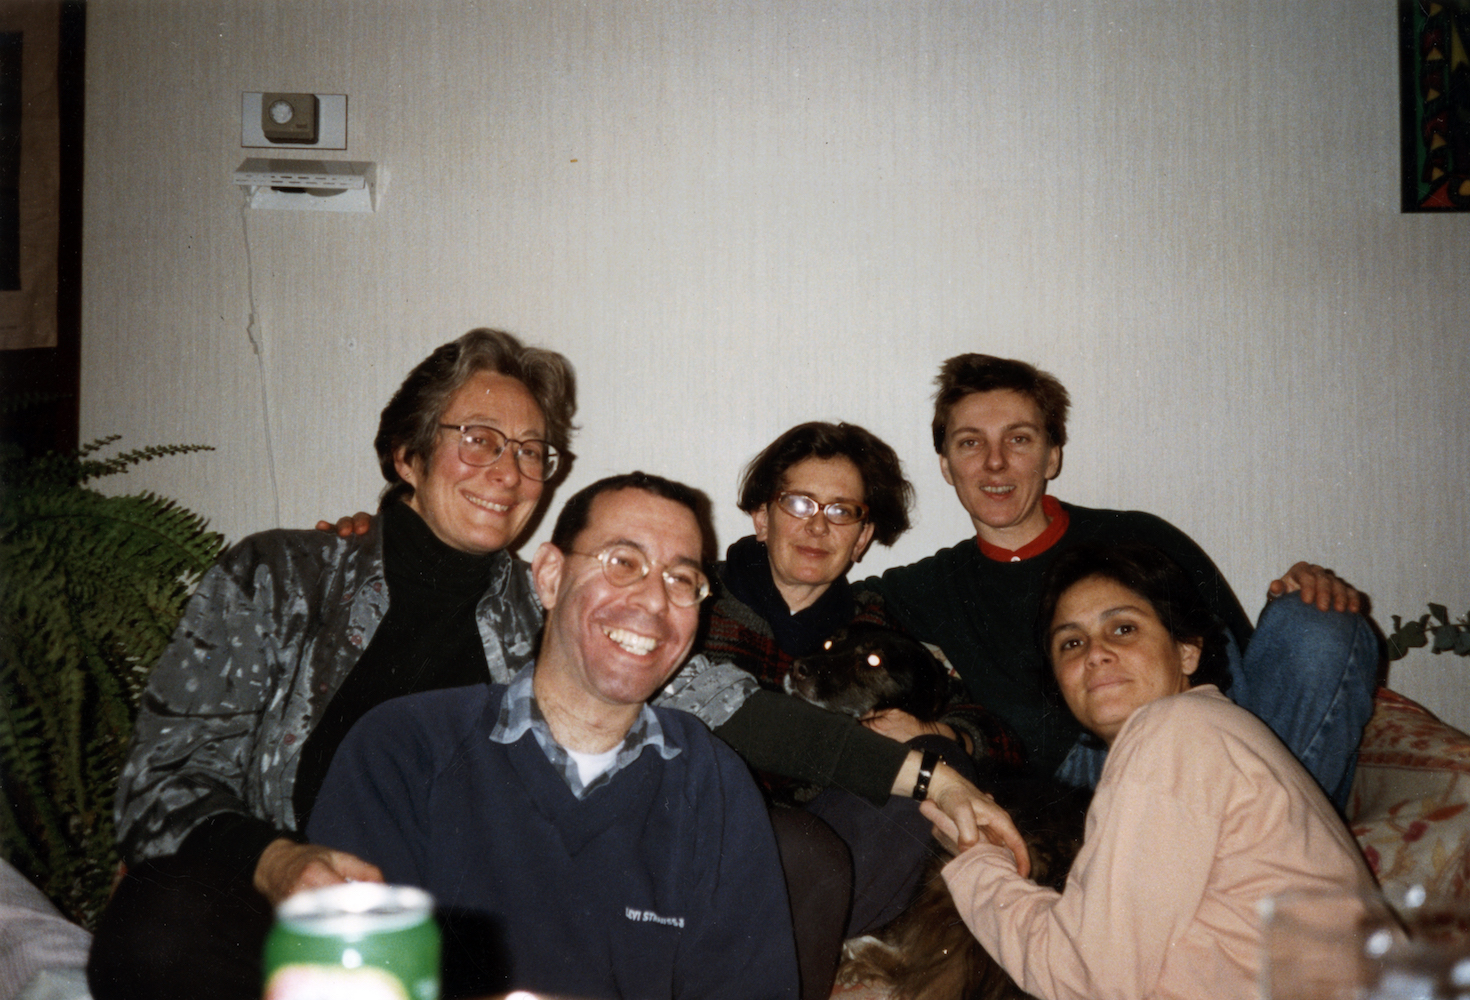 Terry at a New Year’s Eve gathering to watch Doris Day movies with the Doris Day Gay Fan Club, Amsterdam, 1993. L-R:  Terry, Elliot Rubin (close gay friend, composer and choral conducter), Godelieve Smelt (on-again-off-again lover, painter), Cory (a passing friend), and Diana Avila (one of Terry’s “great loves,” a Costa Rican poet working for the International Press Service in Amsterdam). Photo courtesy of Terry Baum.